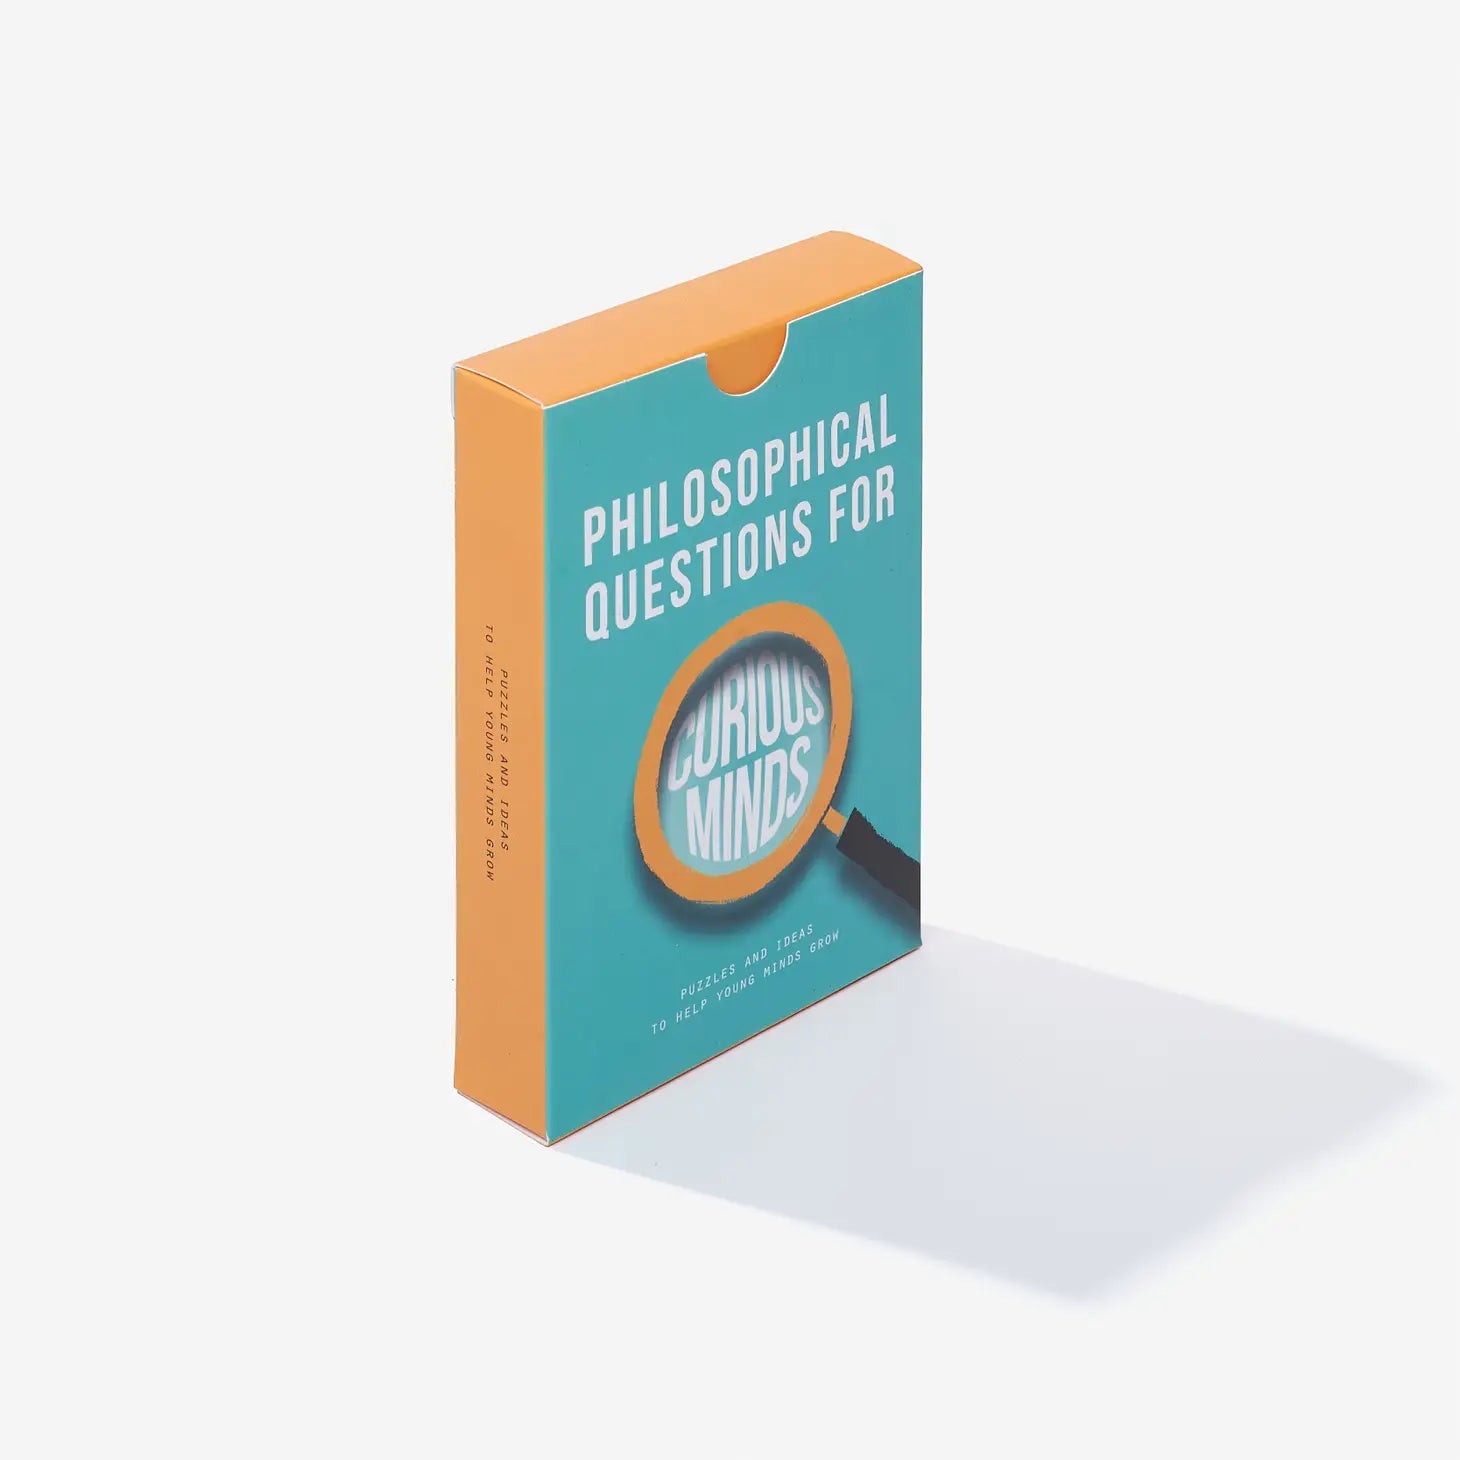 10 Philosophy Board and Card Games